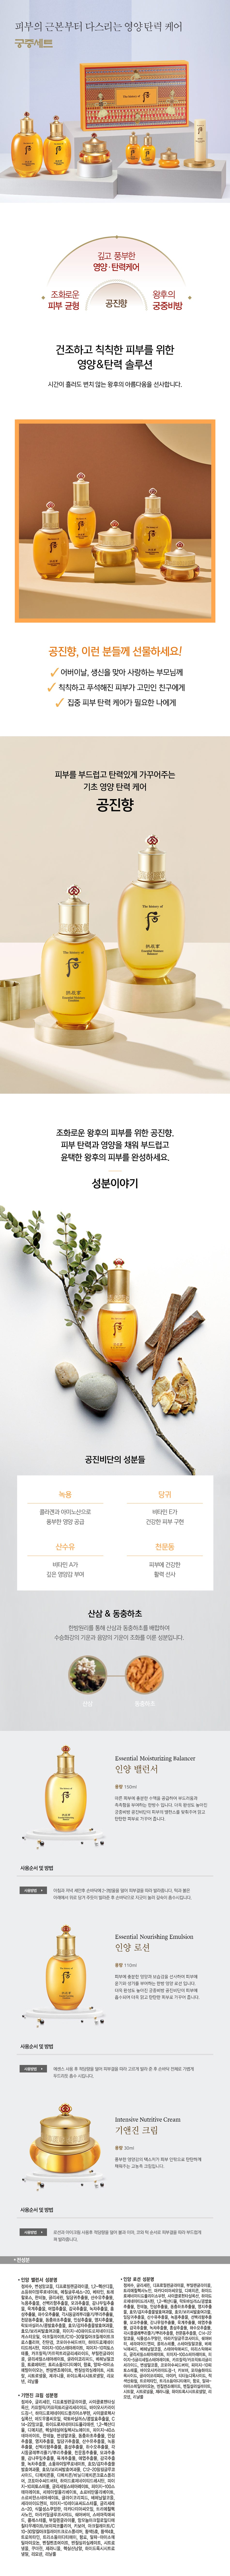 The History Of Whoo_Gongjinhyang Holiday Set_1